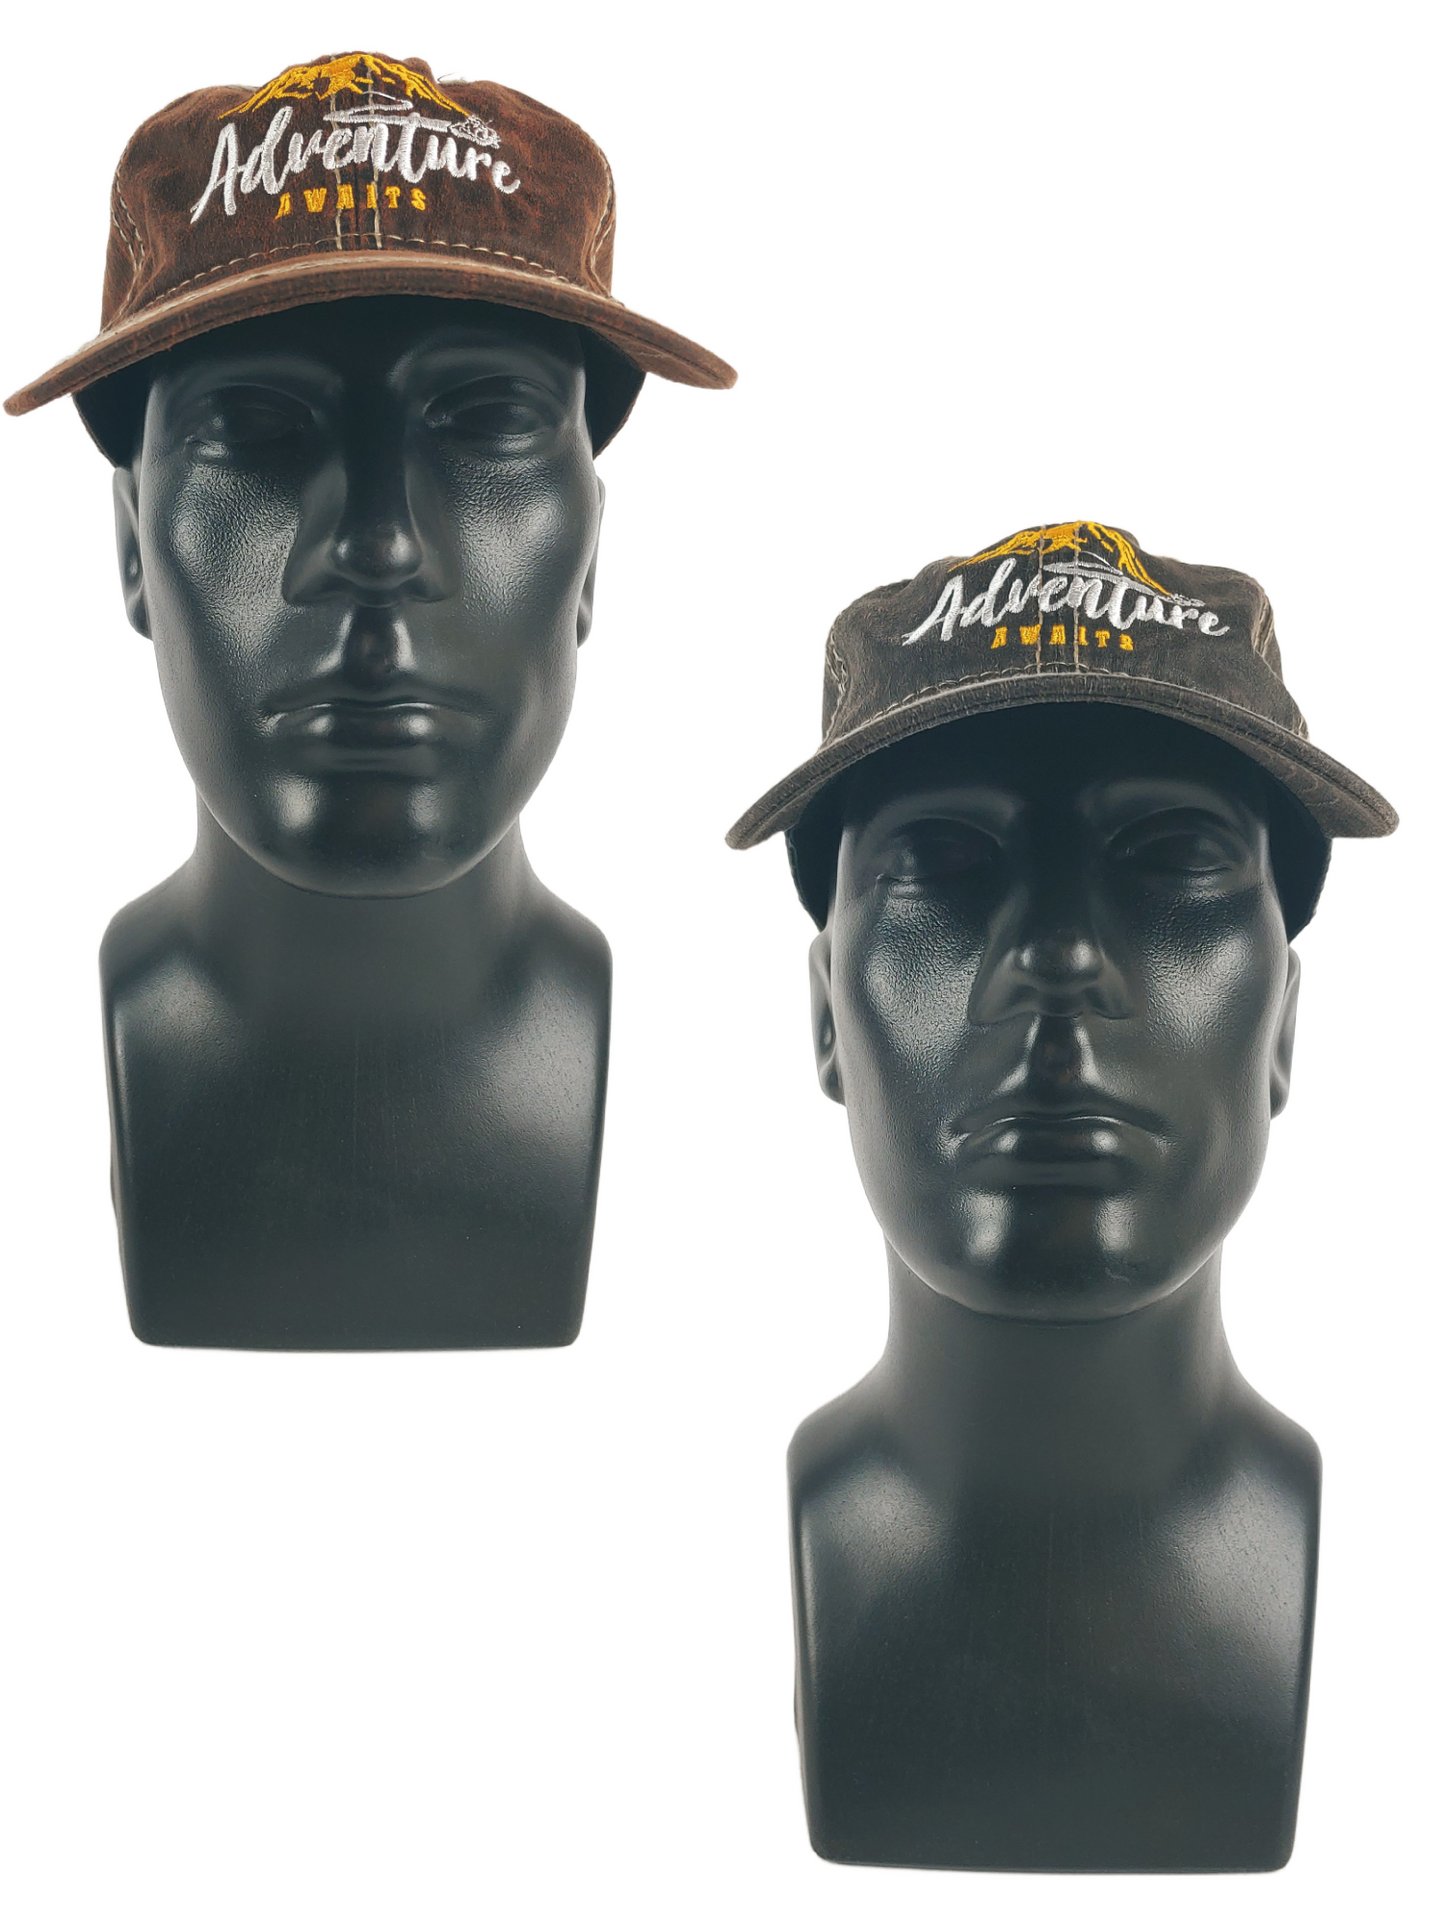 Adventure Awaits - Oiled Canvas - Charcoal or Brown - Baseball Style Hat